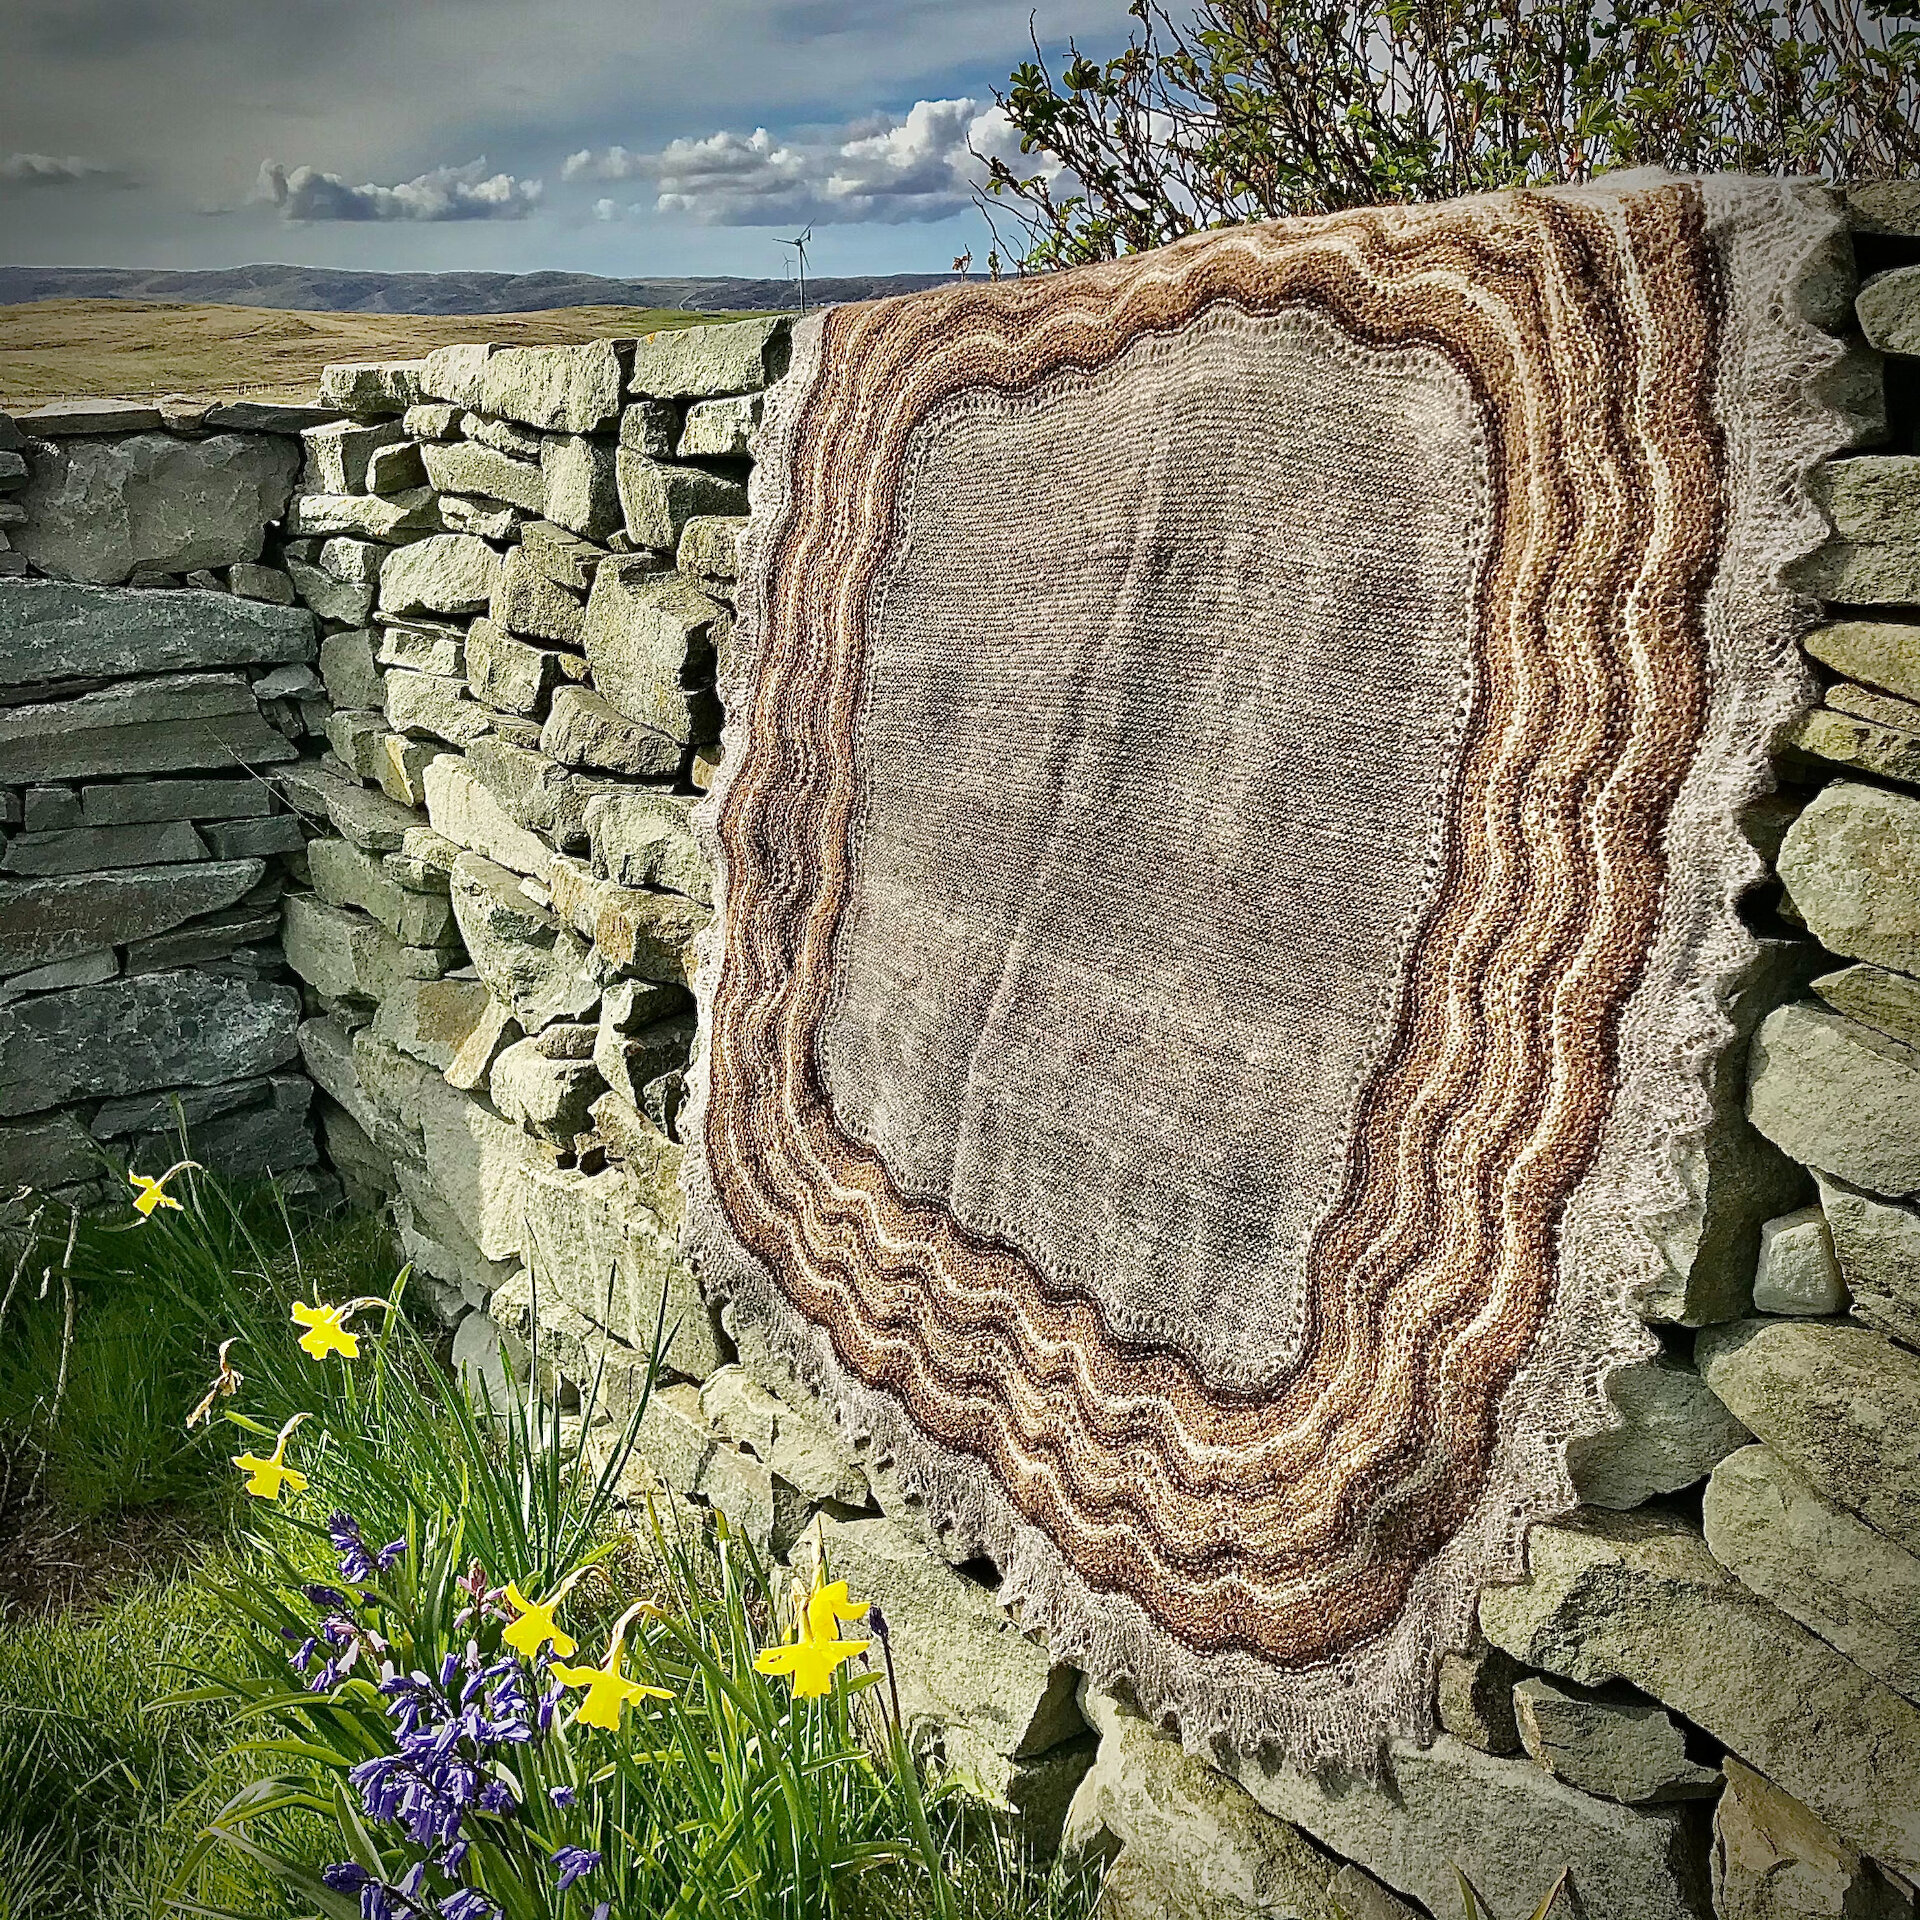 An exquisite Shetland hap shawl made from Garths Croft Bressay fleeces by Mary Boyd.